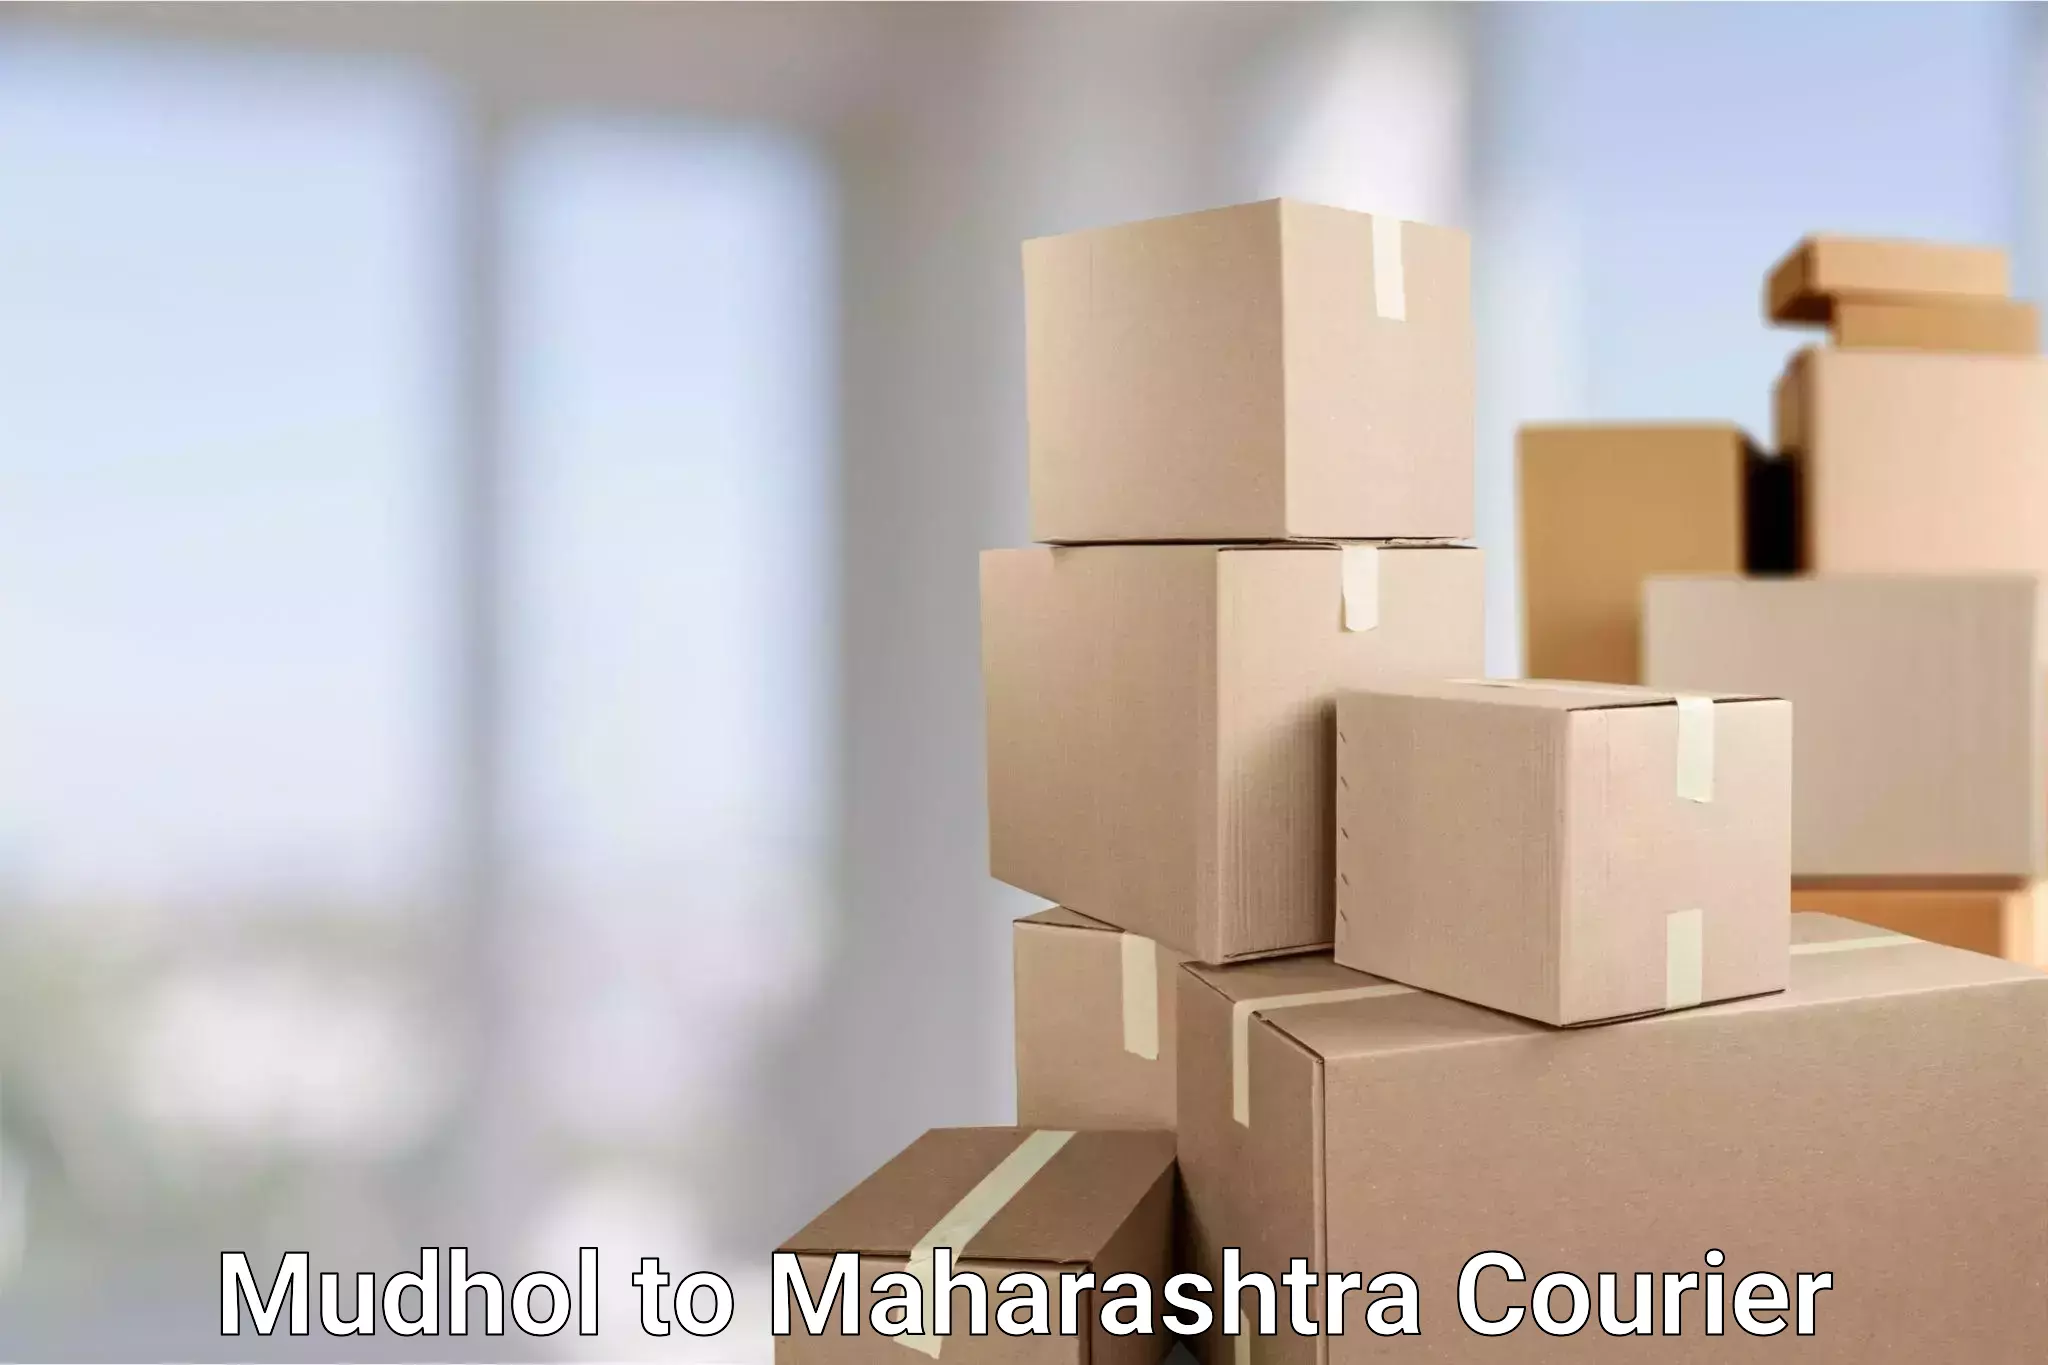 Express delivery capabilities in Mudhol to Junnar